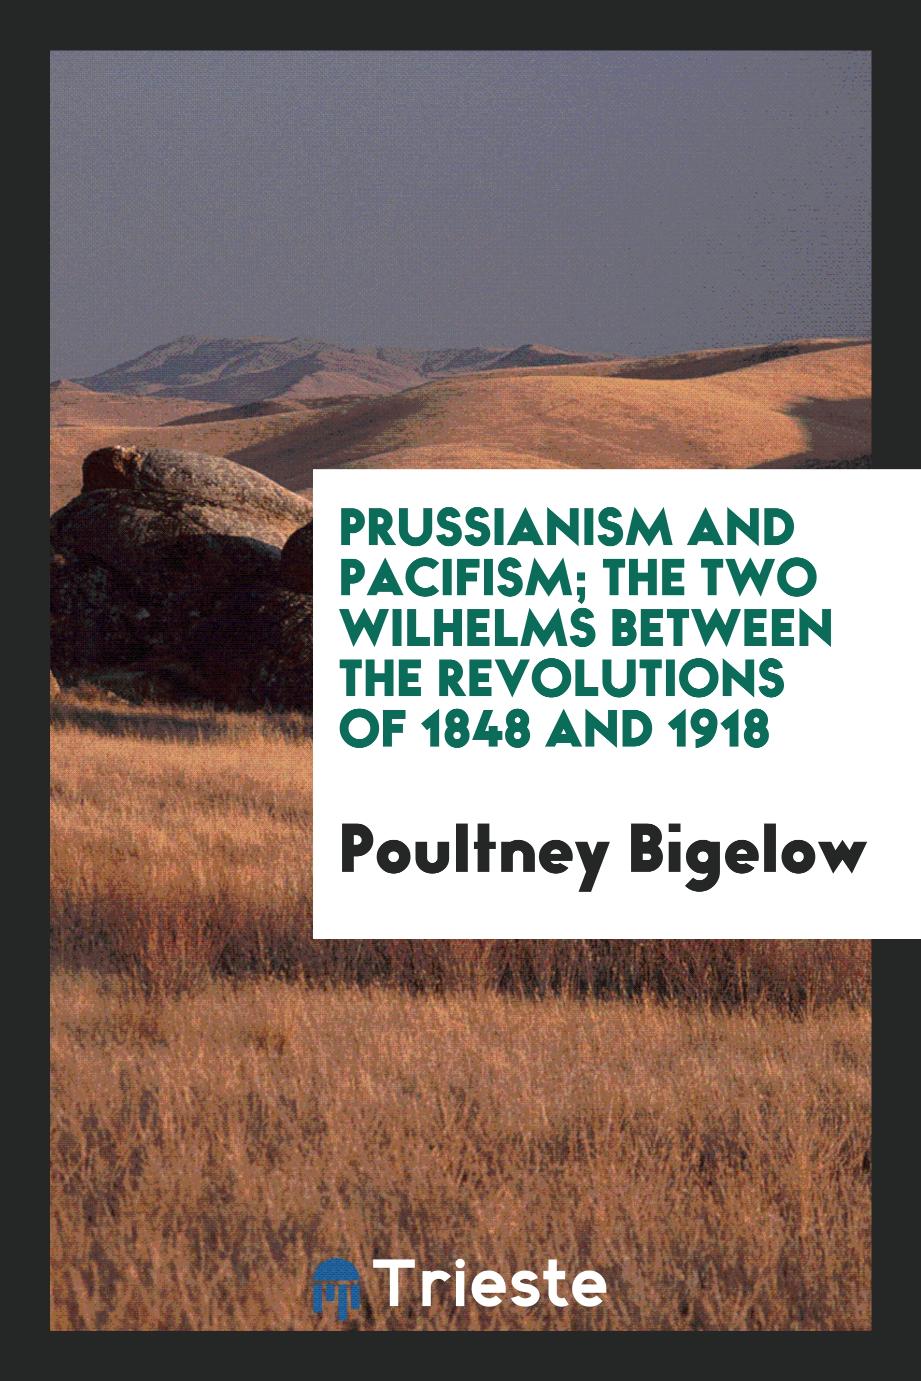 Prussianism and pacifism; the two Wilhelms between the revolutions of 1848 and 1918 - Poultney Bigelow